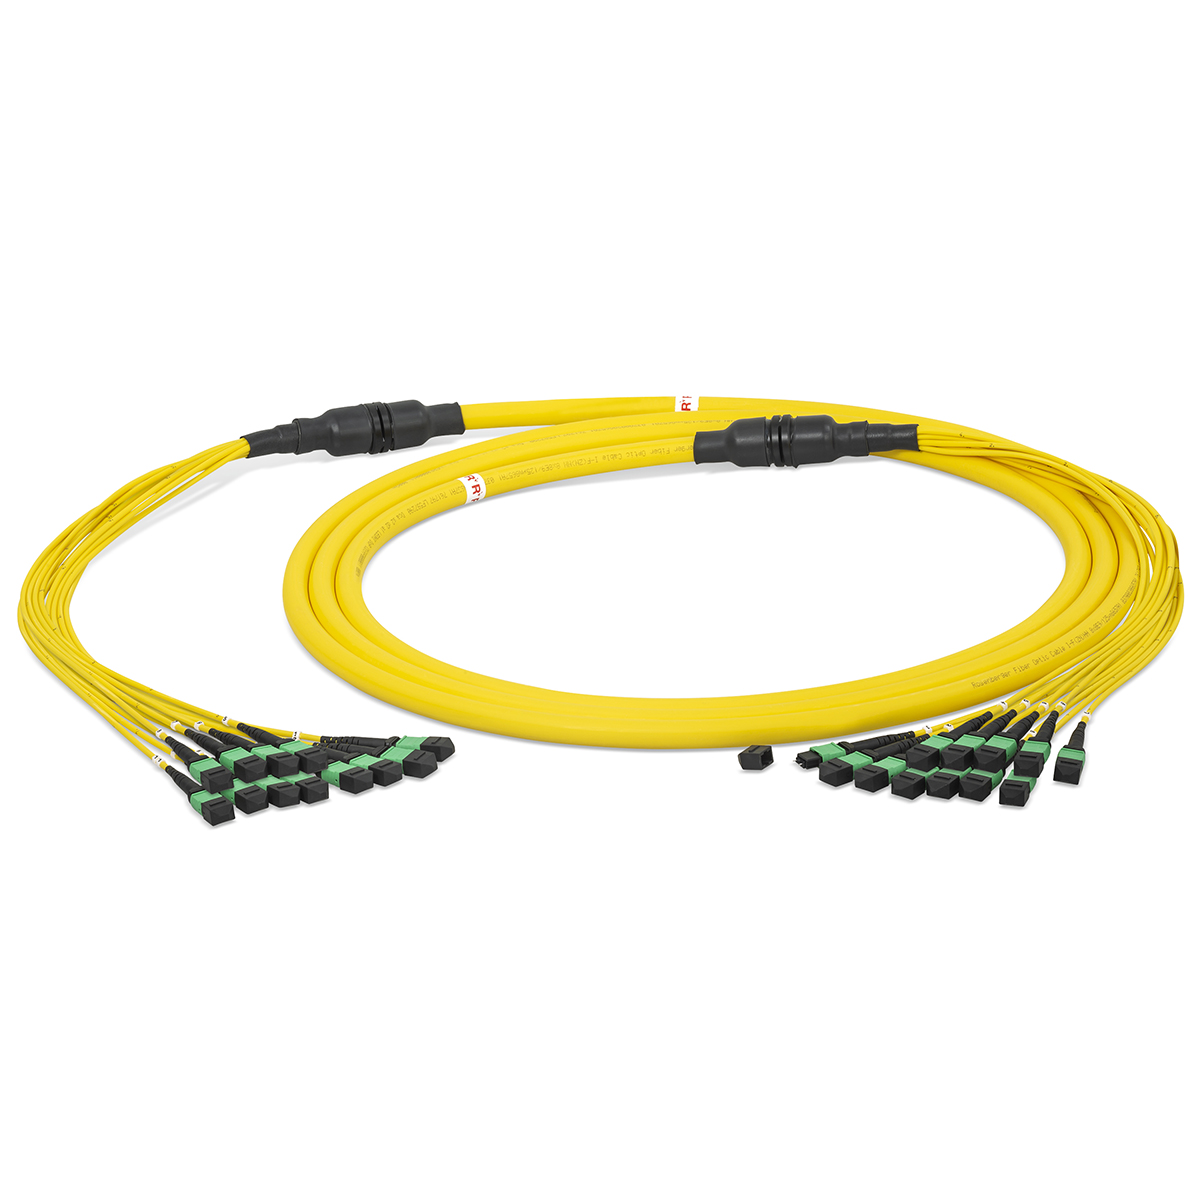 Fiber optic trunk cable breakout 96 fibers singlemode OS2, MTP®-OCTO-PC-m/ MTP®-OCTO-PC-m, I-F(ZN)HH